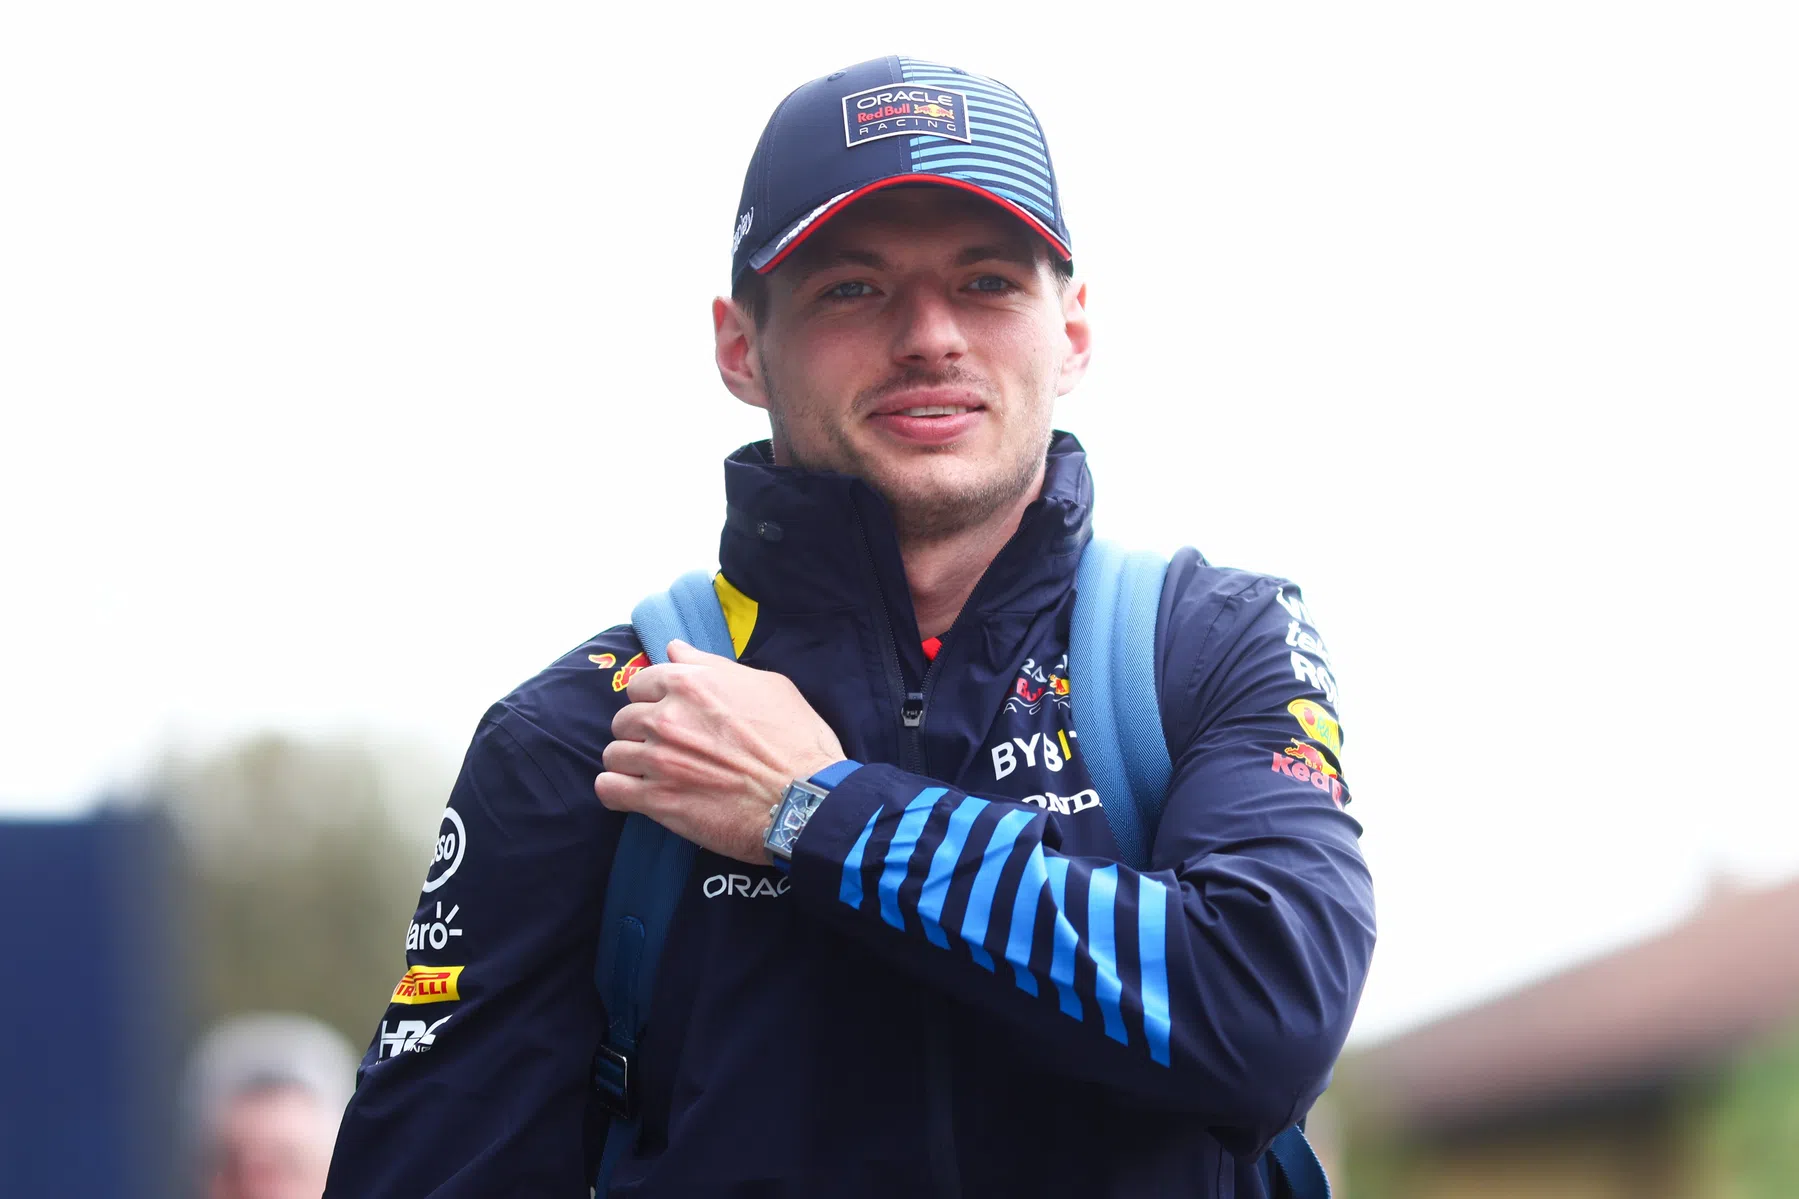 Competitors of Max Verstappen believe Red Bull is beatable